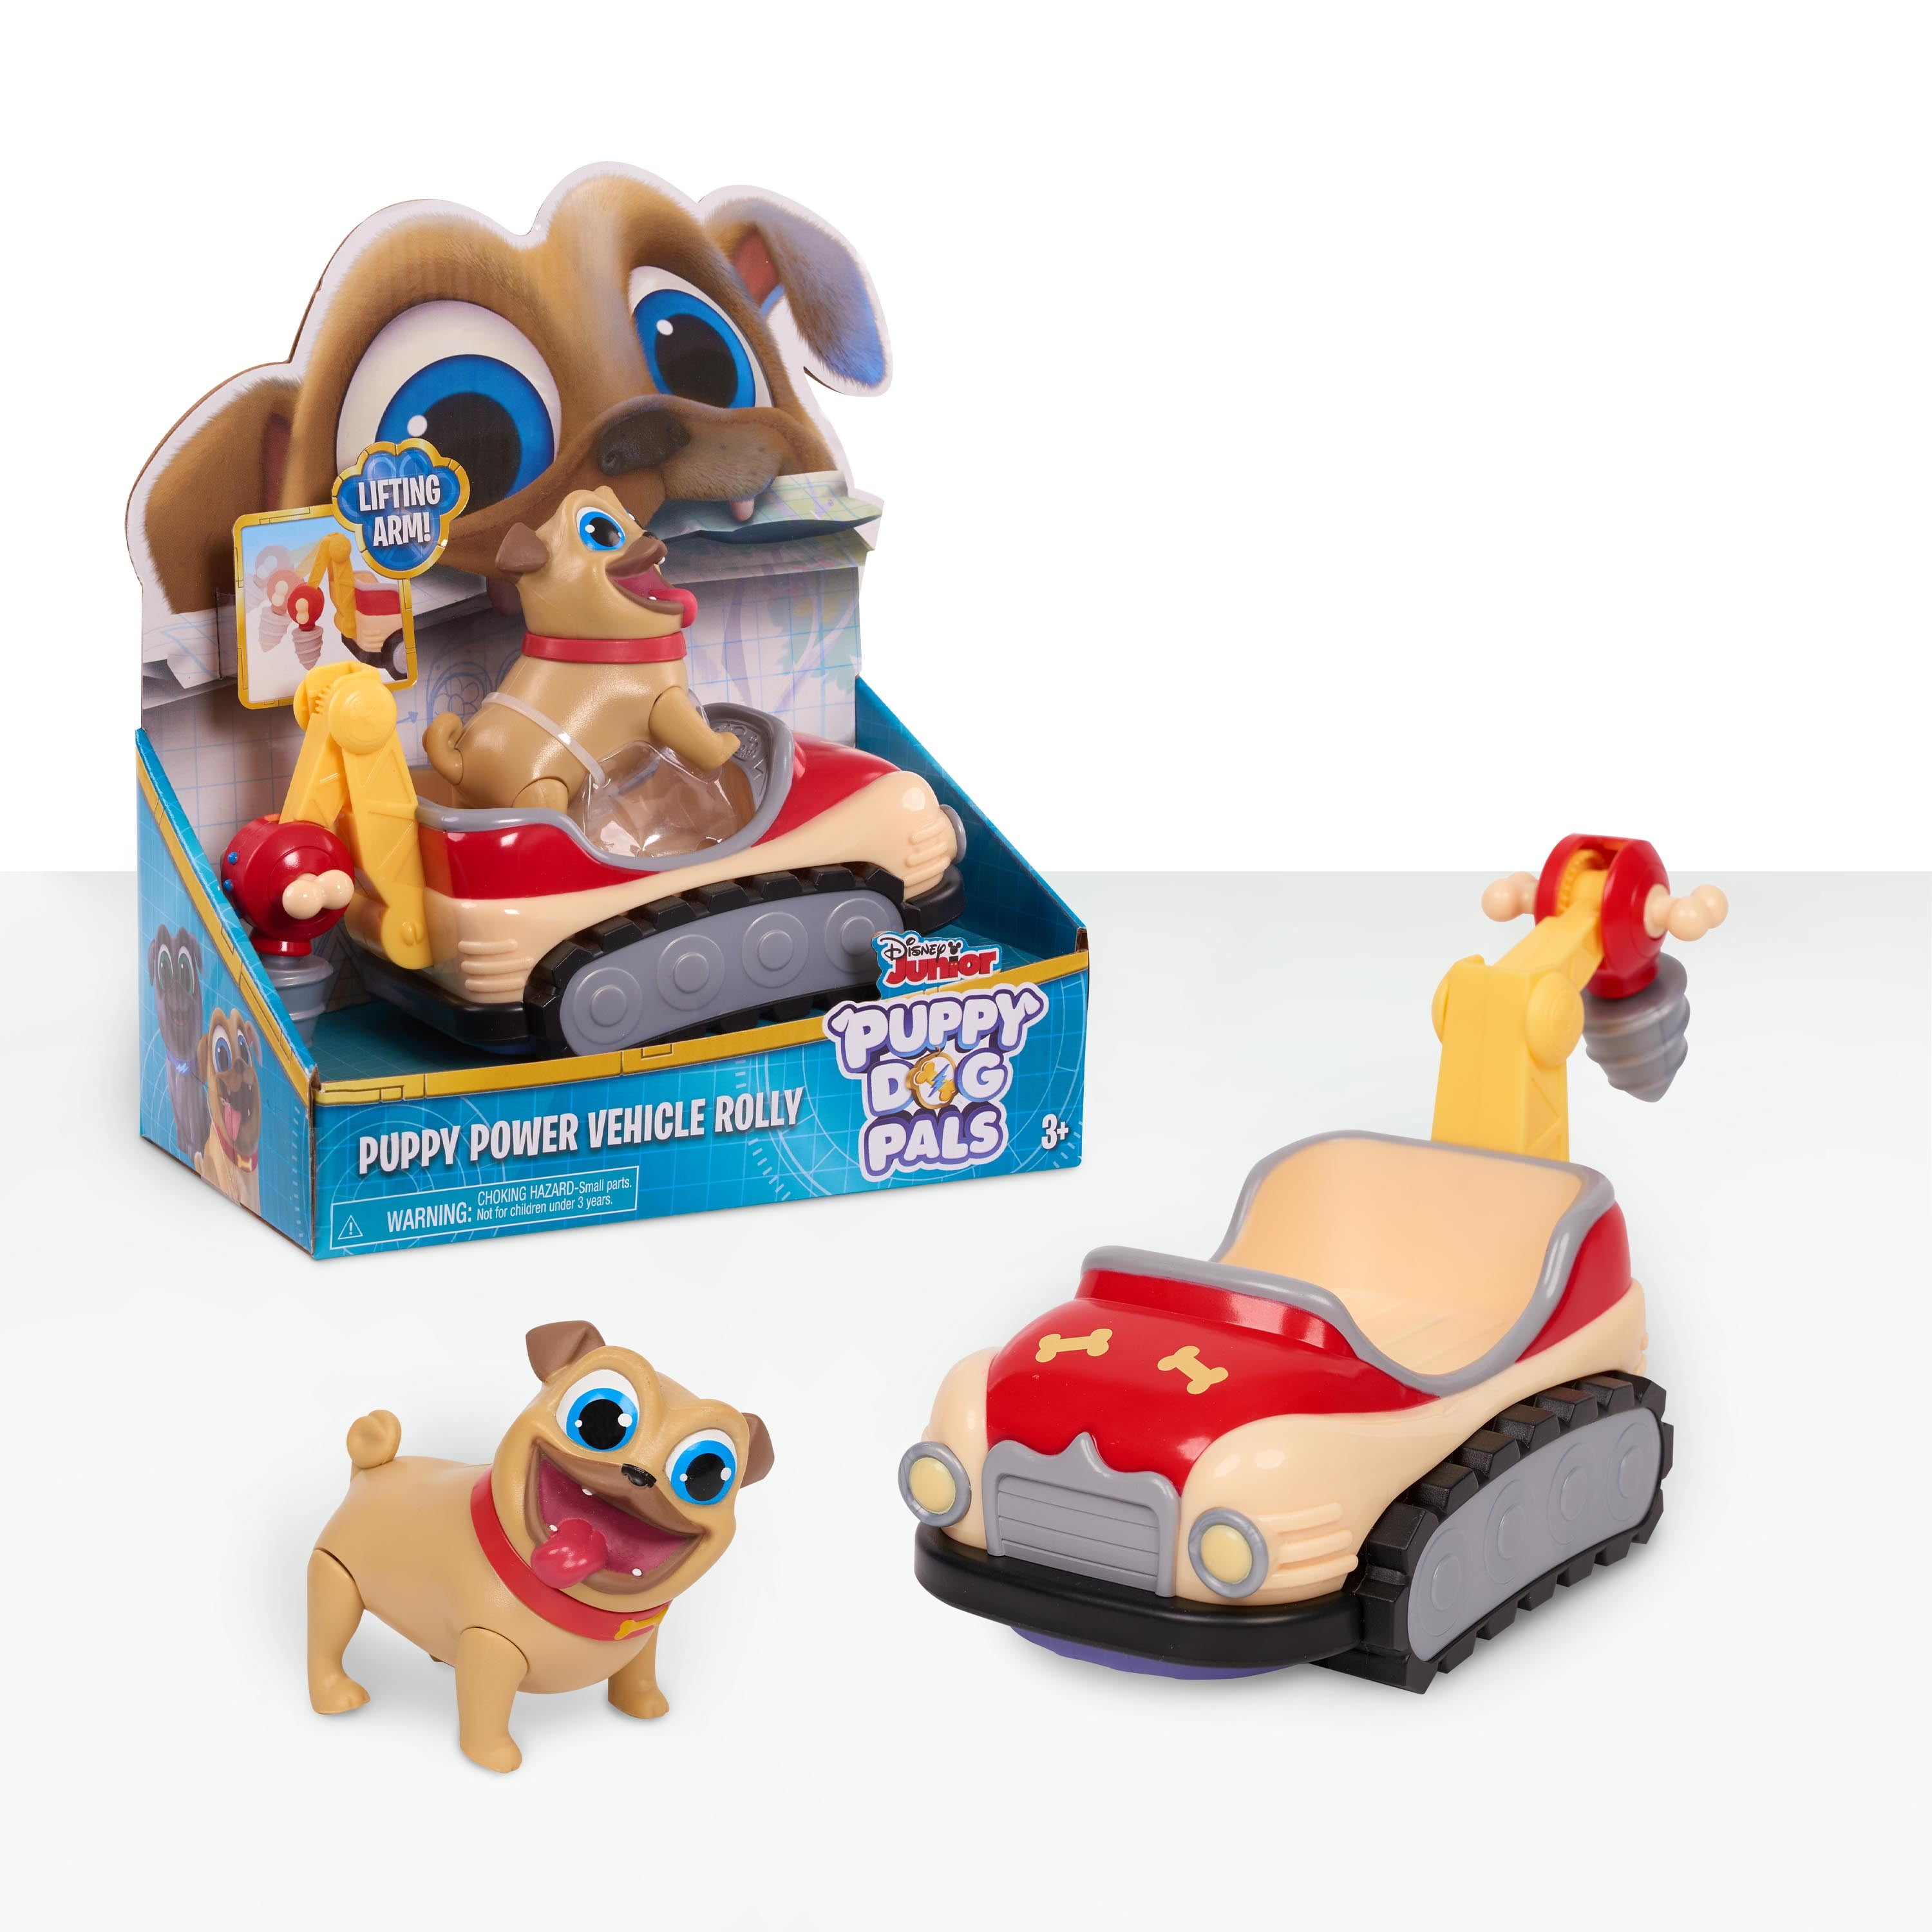 Puppy Dog Pals Puppy Power Vehicles, Rolly, Officially Licensed Kids Toys  for Ages 3 Up, Gifts and Presents 